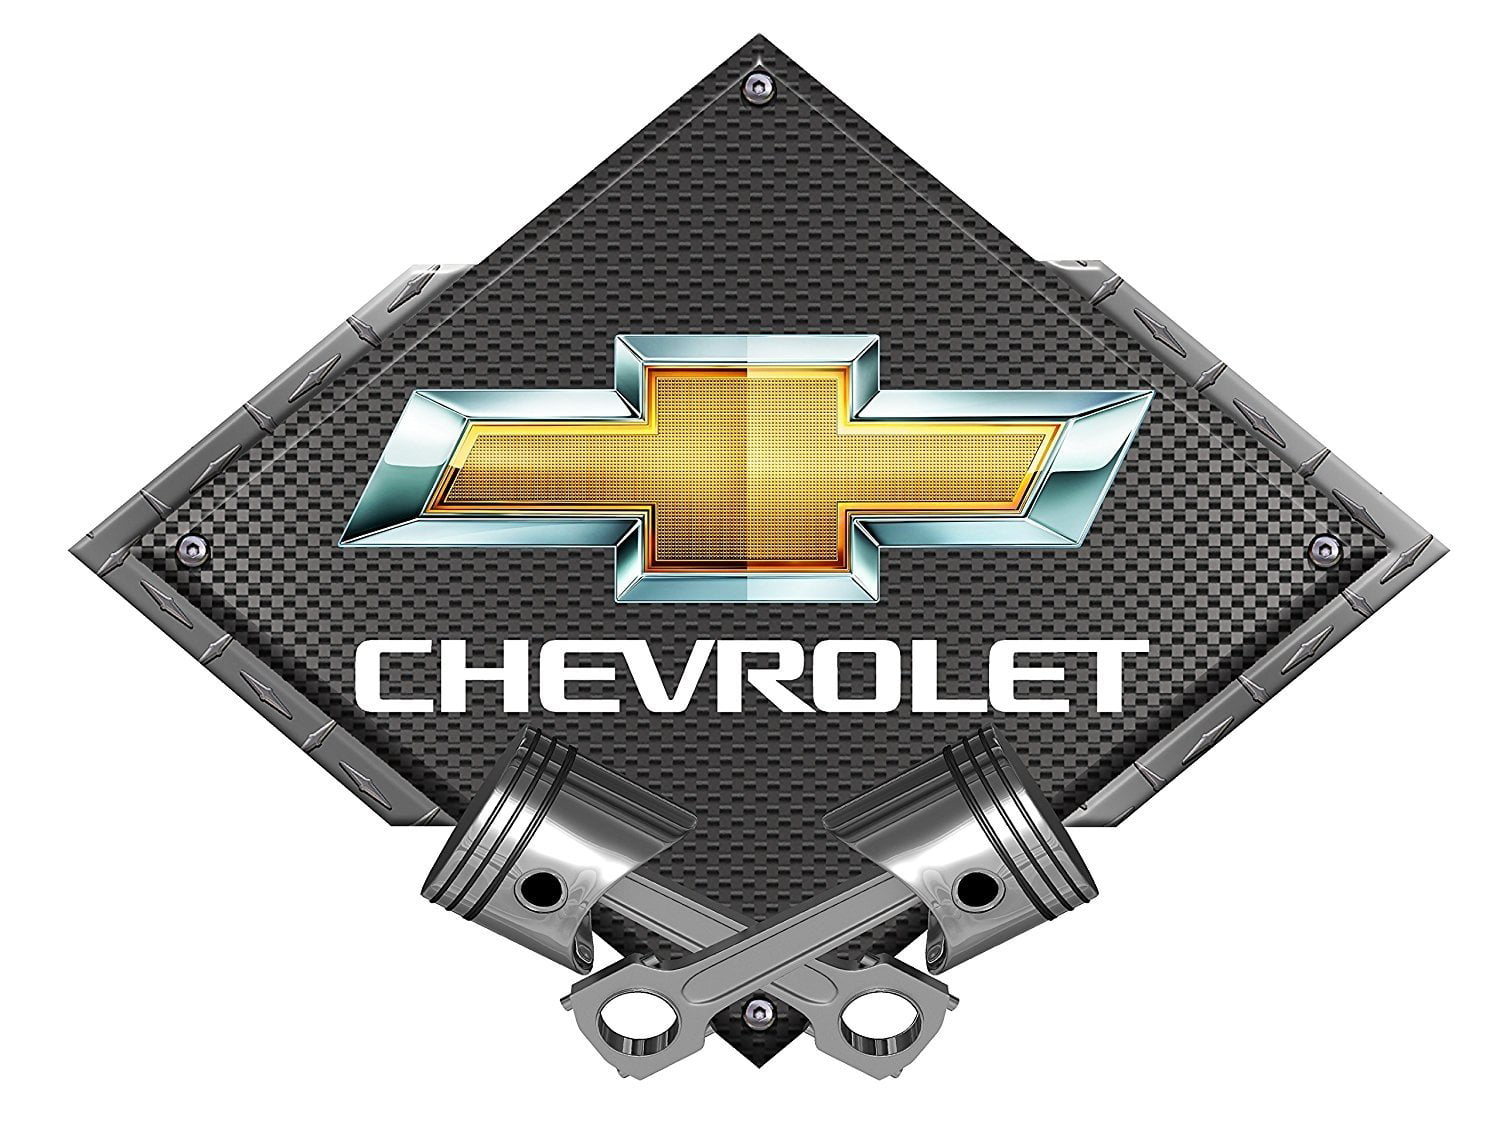 Chevrolet Camaro Gold Bowtie Supersized Metal Sign 50x14 inches 